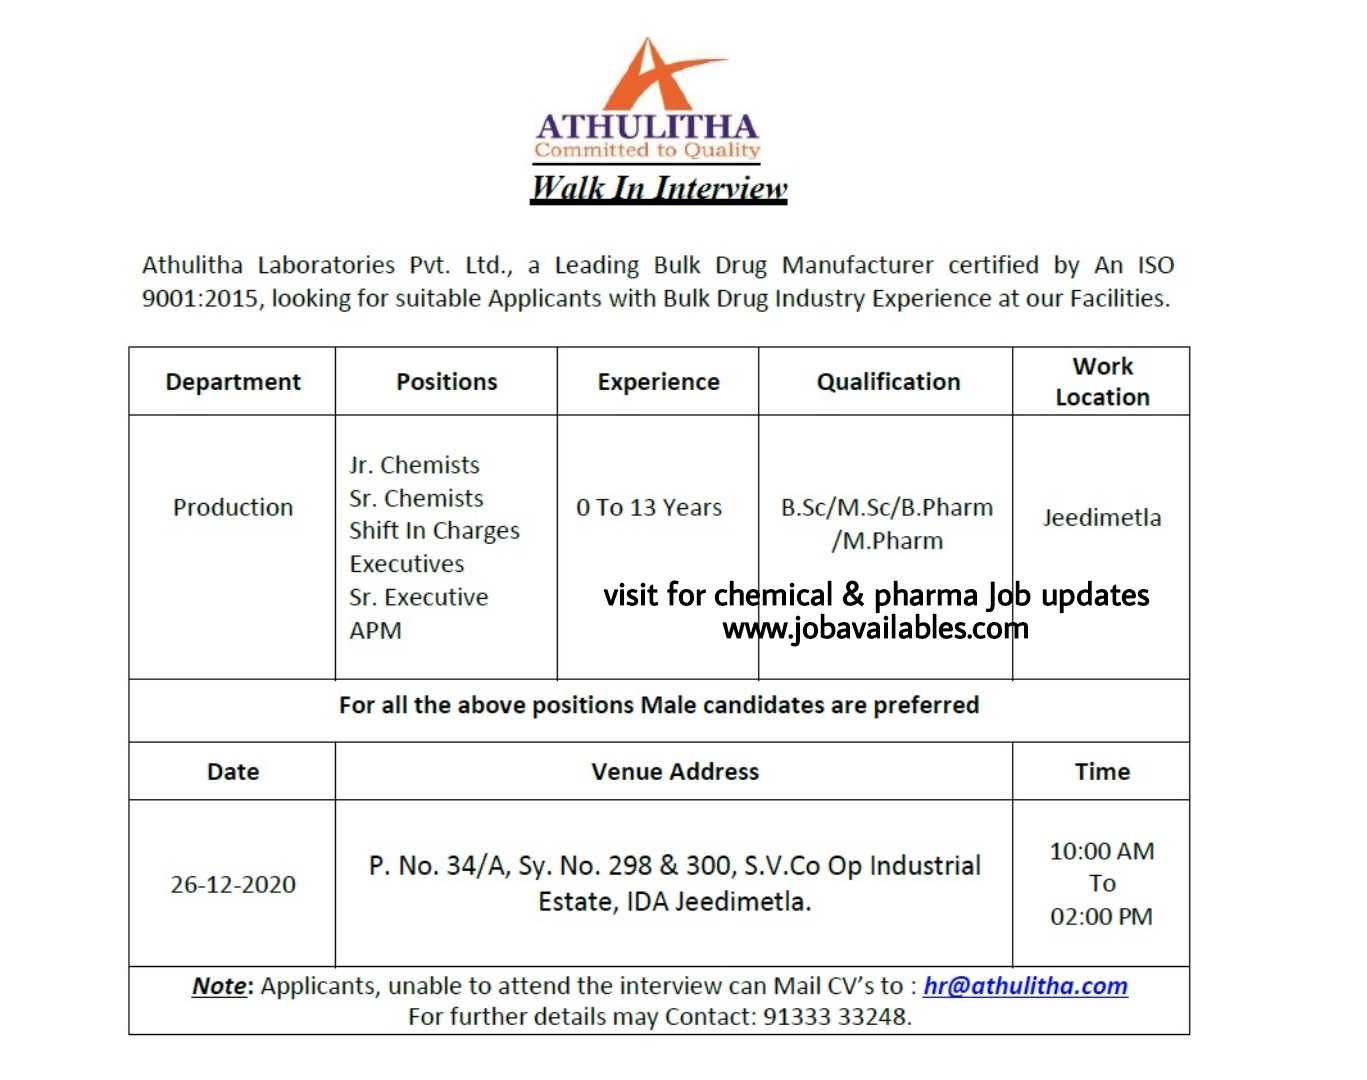 Job Availables, Athulitha Laboratories Pvt Ltd Interview For Freshers & Experienced Msc/ Bsc/ M.Pharma/ B.Pharma In Production Dept